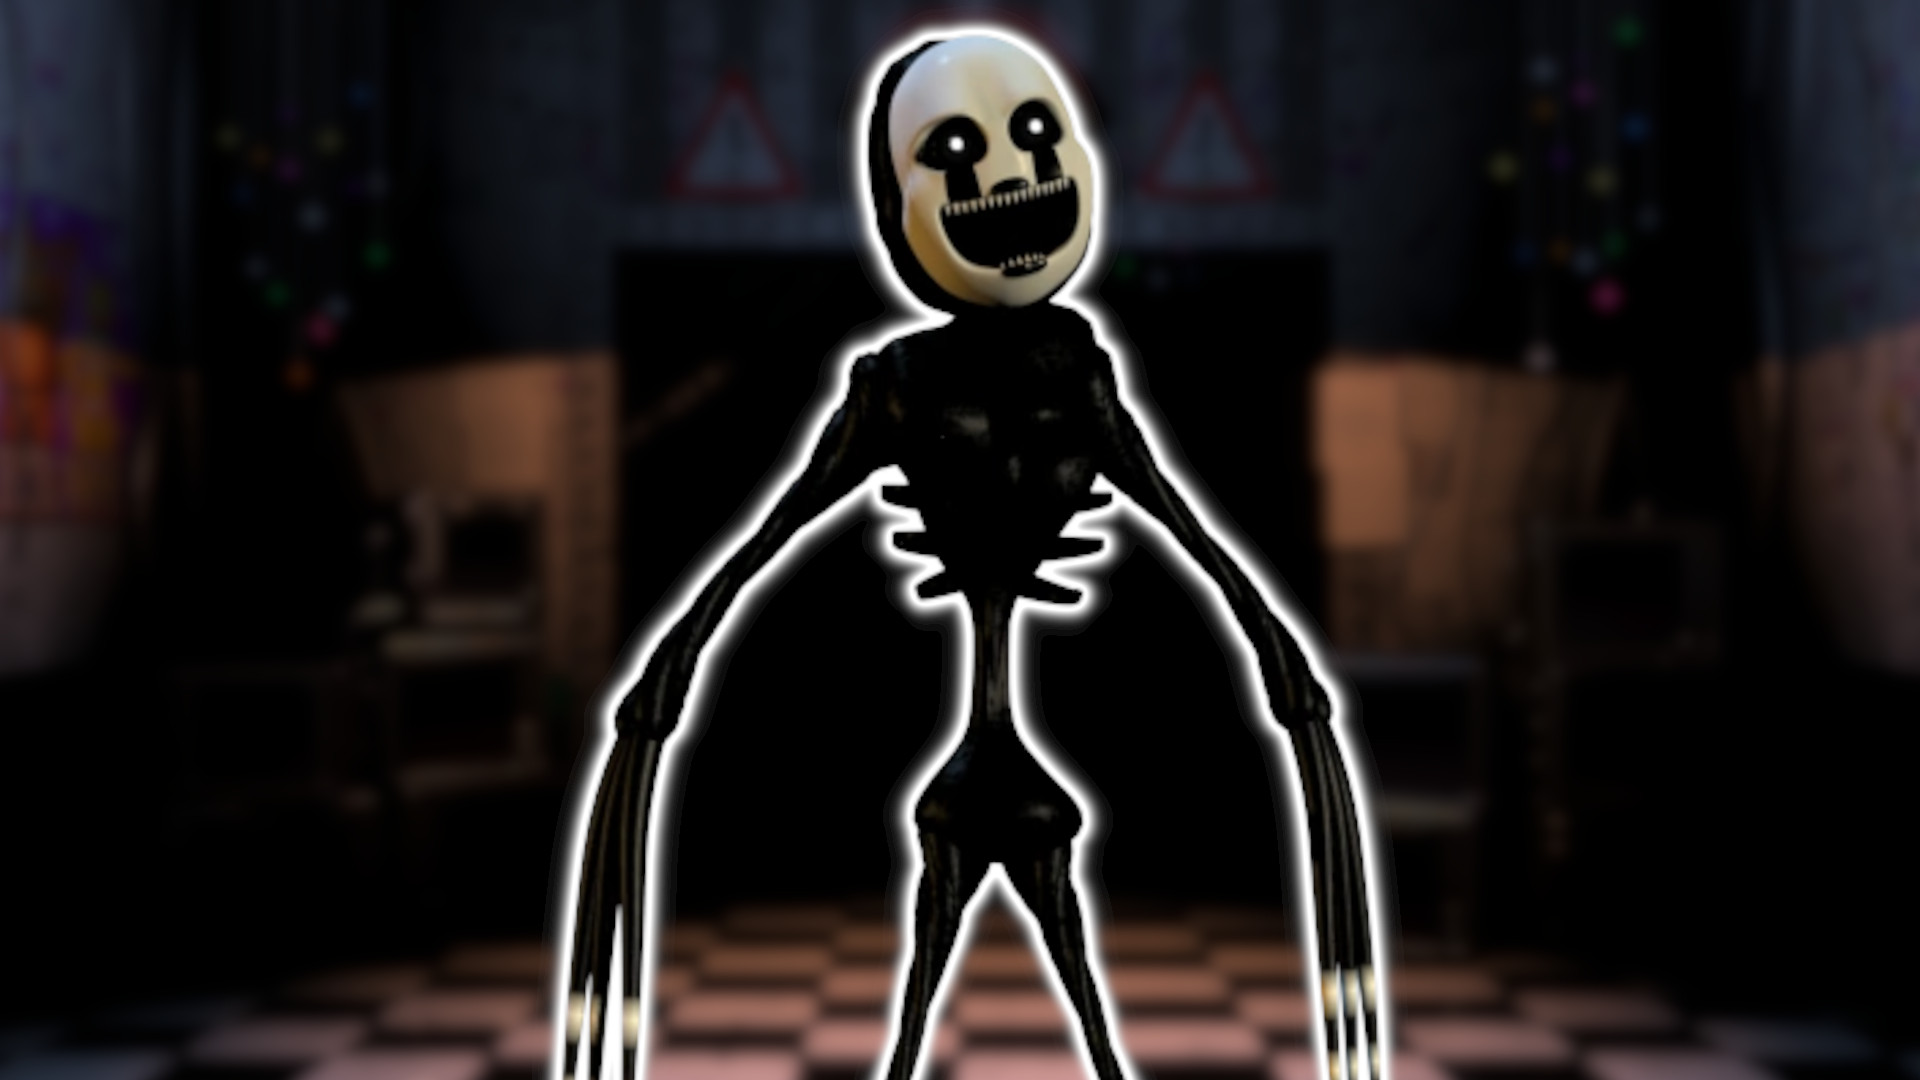 Puppet Master, Marionette, five Nights At Freddys 4, five Nights